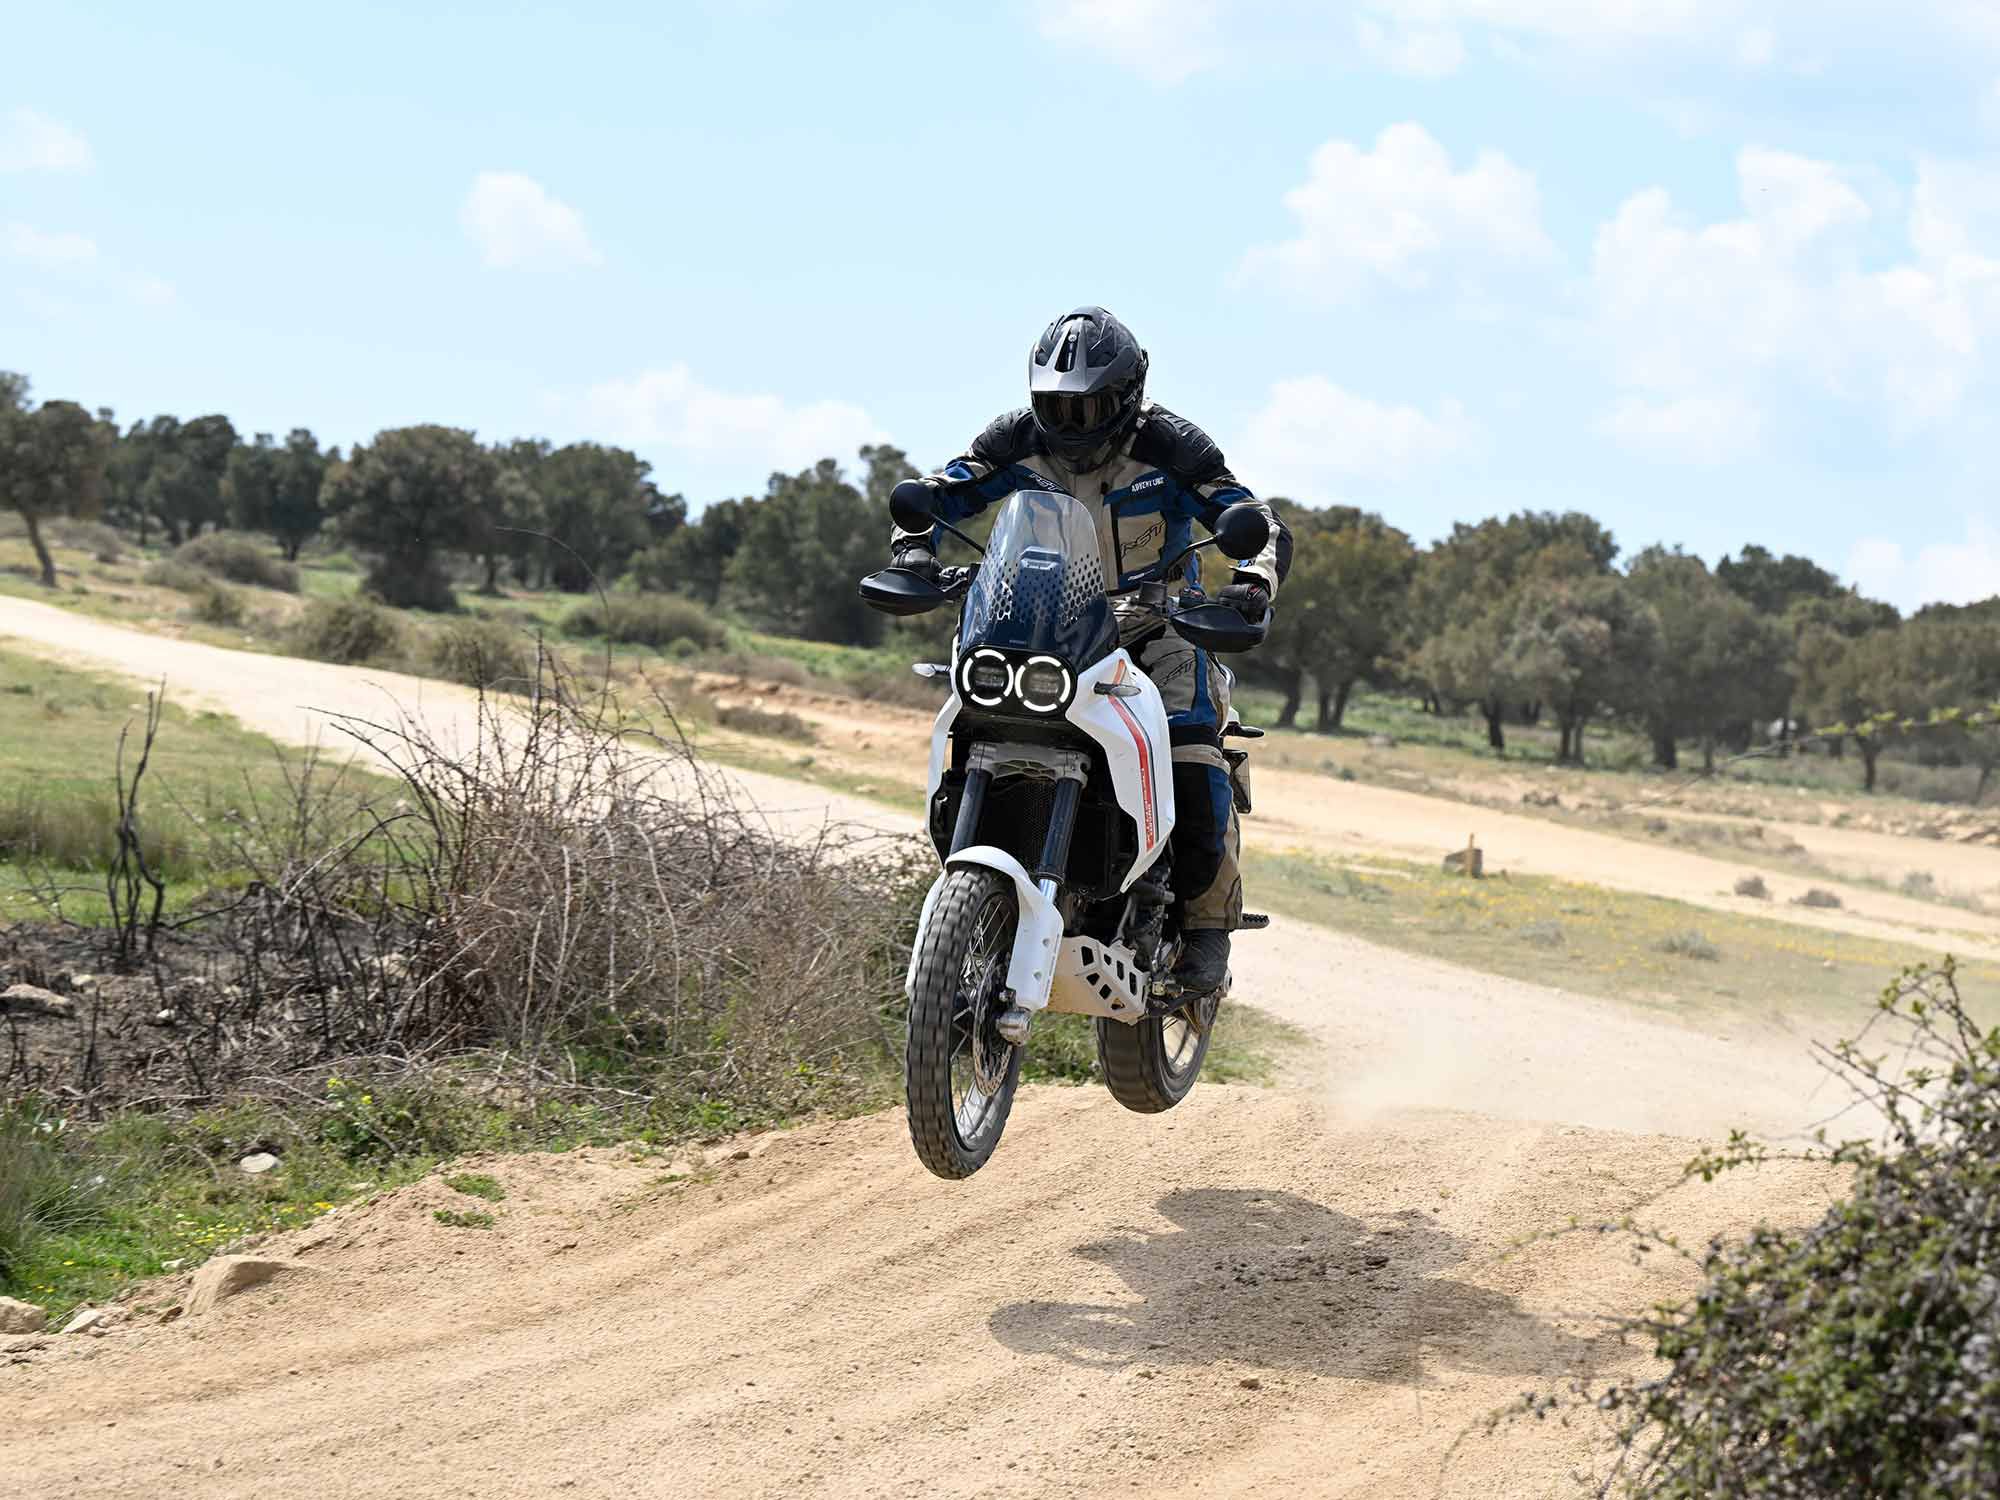 Is $16,975 on the pricey side for a 110 hp, subliter adventure bike?